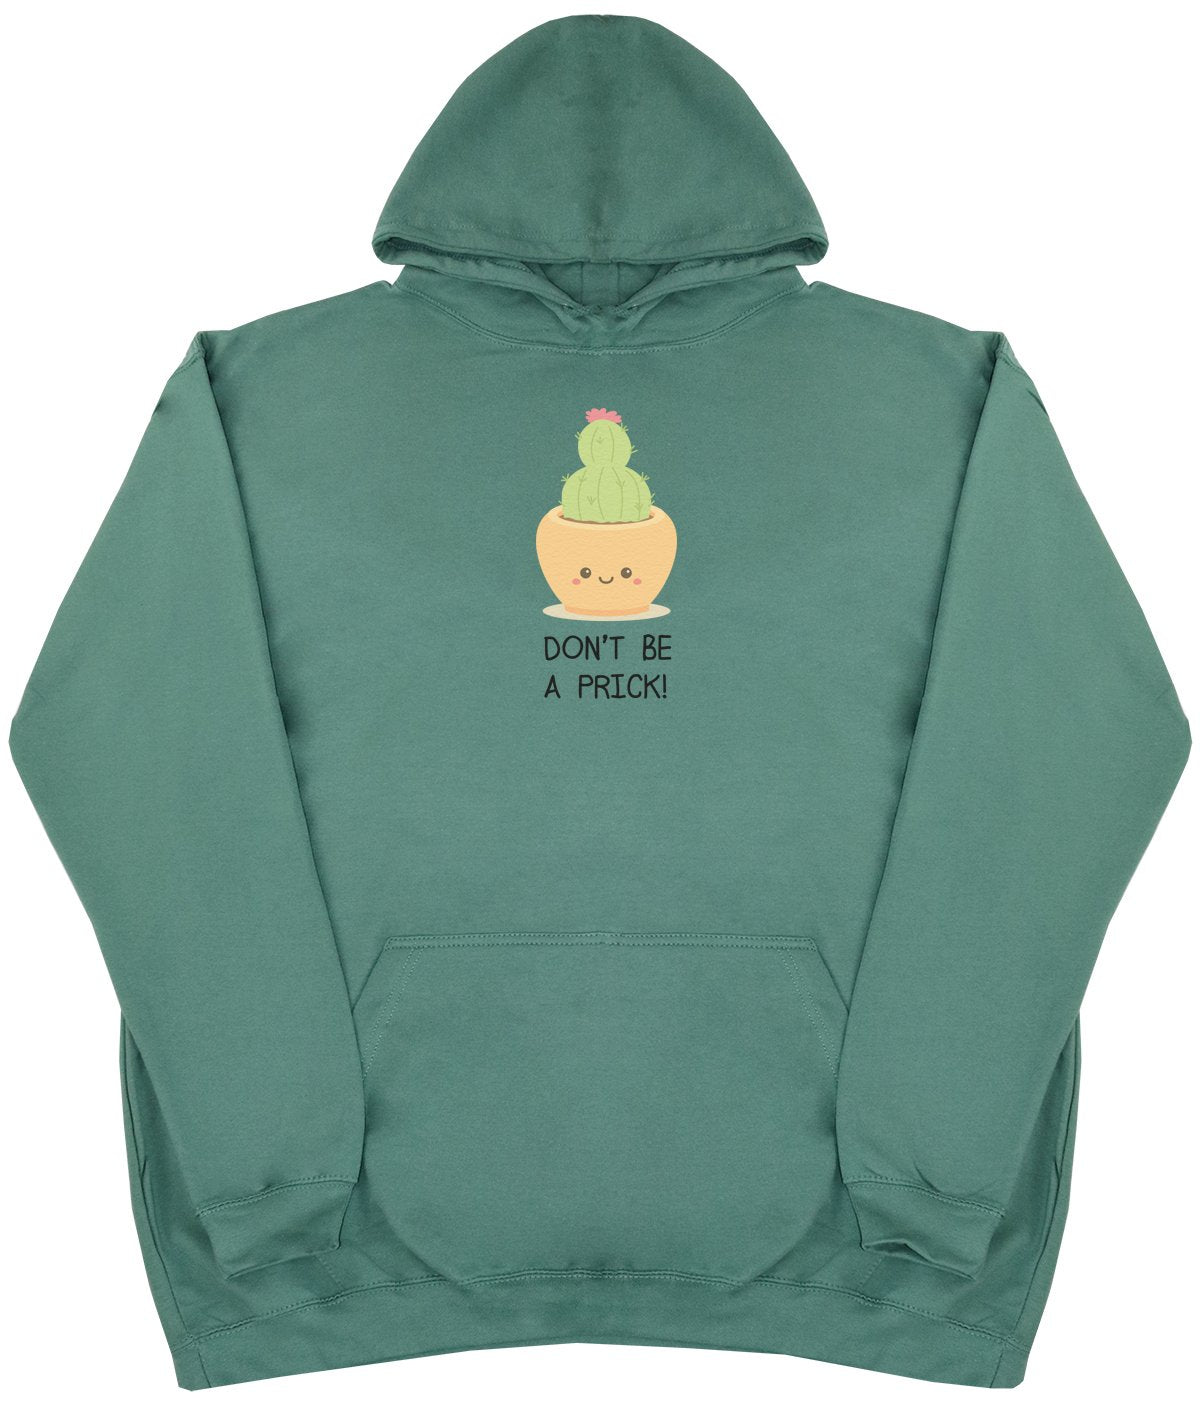 Don't Be A Prick - New Style - Huge Size - Oversized Comfy Hoody